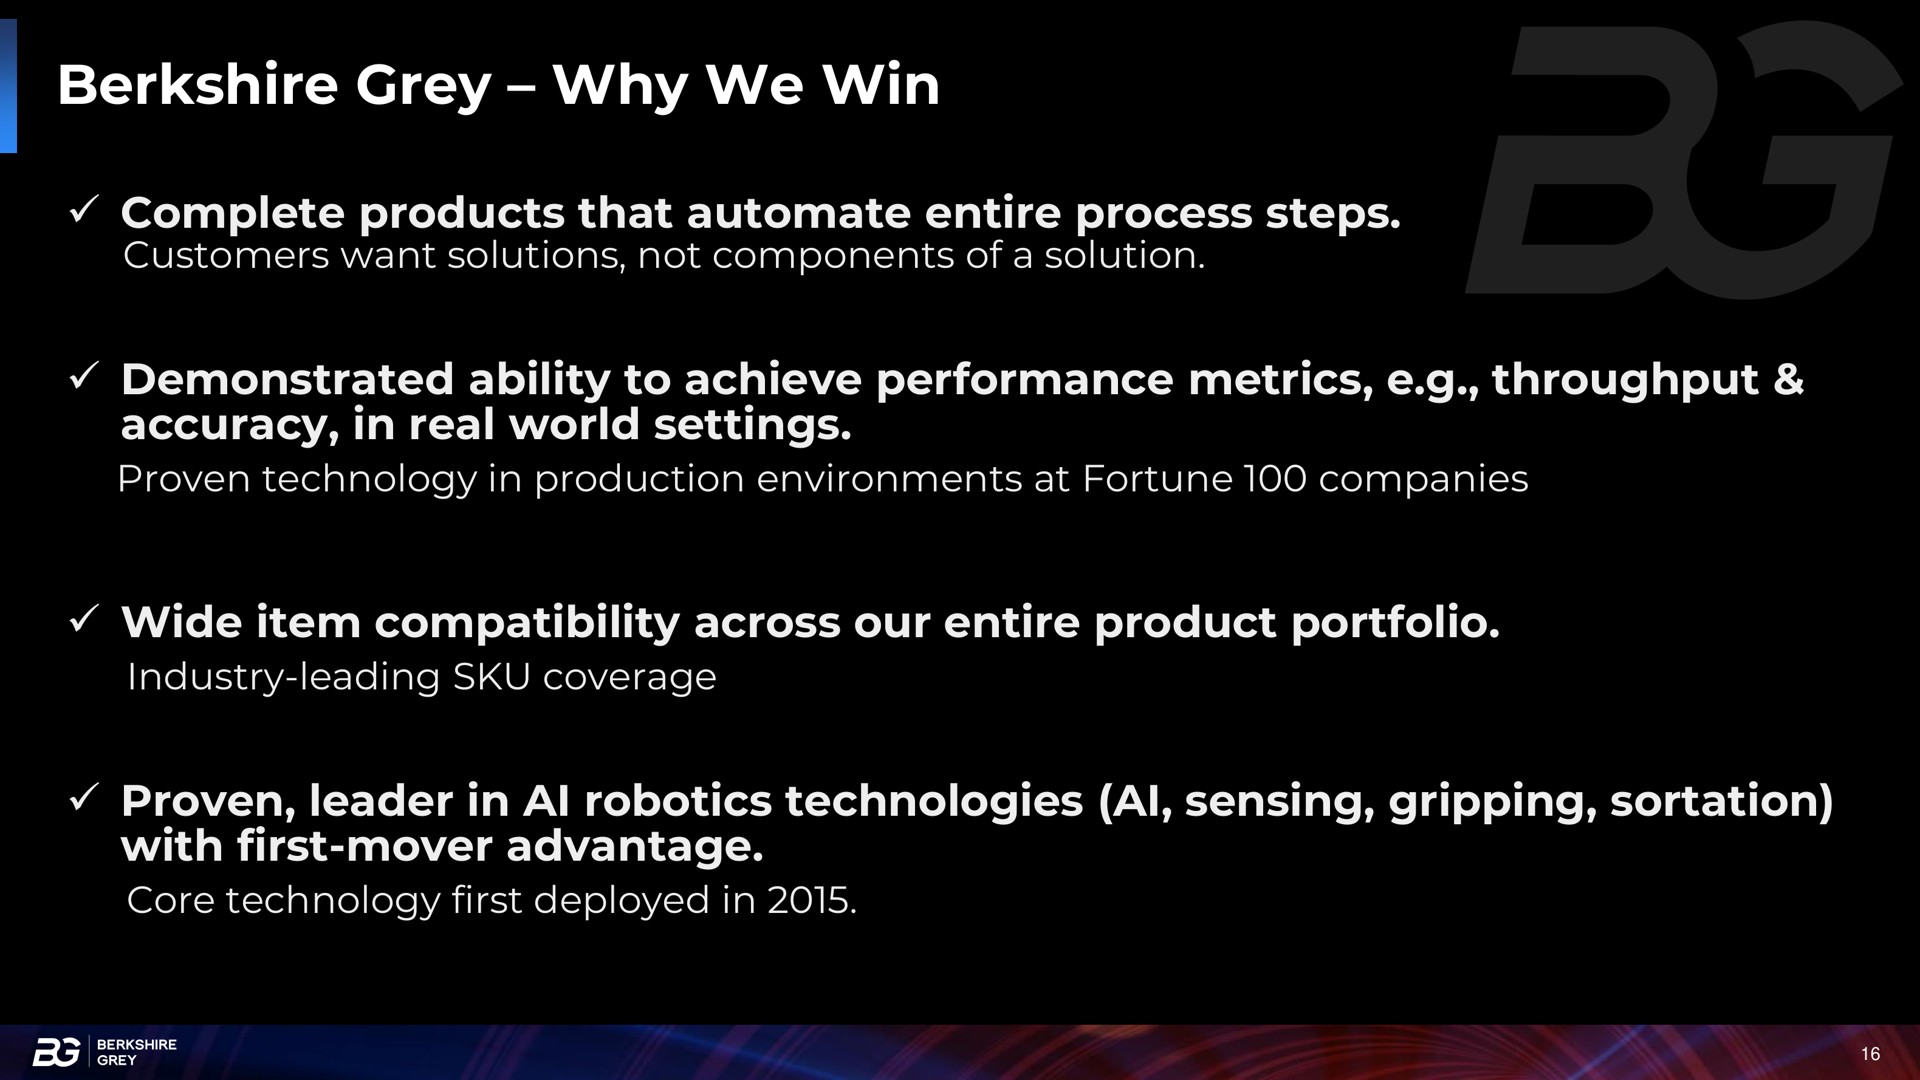 grey why we win complete products that entire process steps customers want solutions not components of a solution demonstrated ability to achieve performance metrics throughput accuracy in real world settings proven technology in production environments at fortune companies wide item compatibility across our entire product portfolio industry leading coverage proven leader in technologies sensing gripping sortation with first mover advantage core technology first deployed in | Berkshire Grey